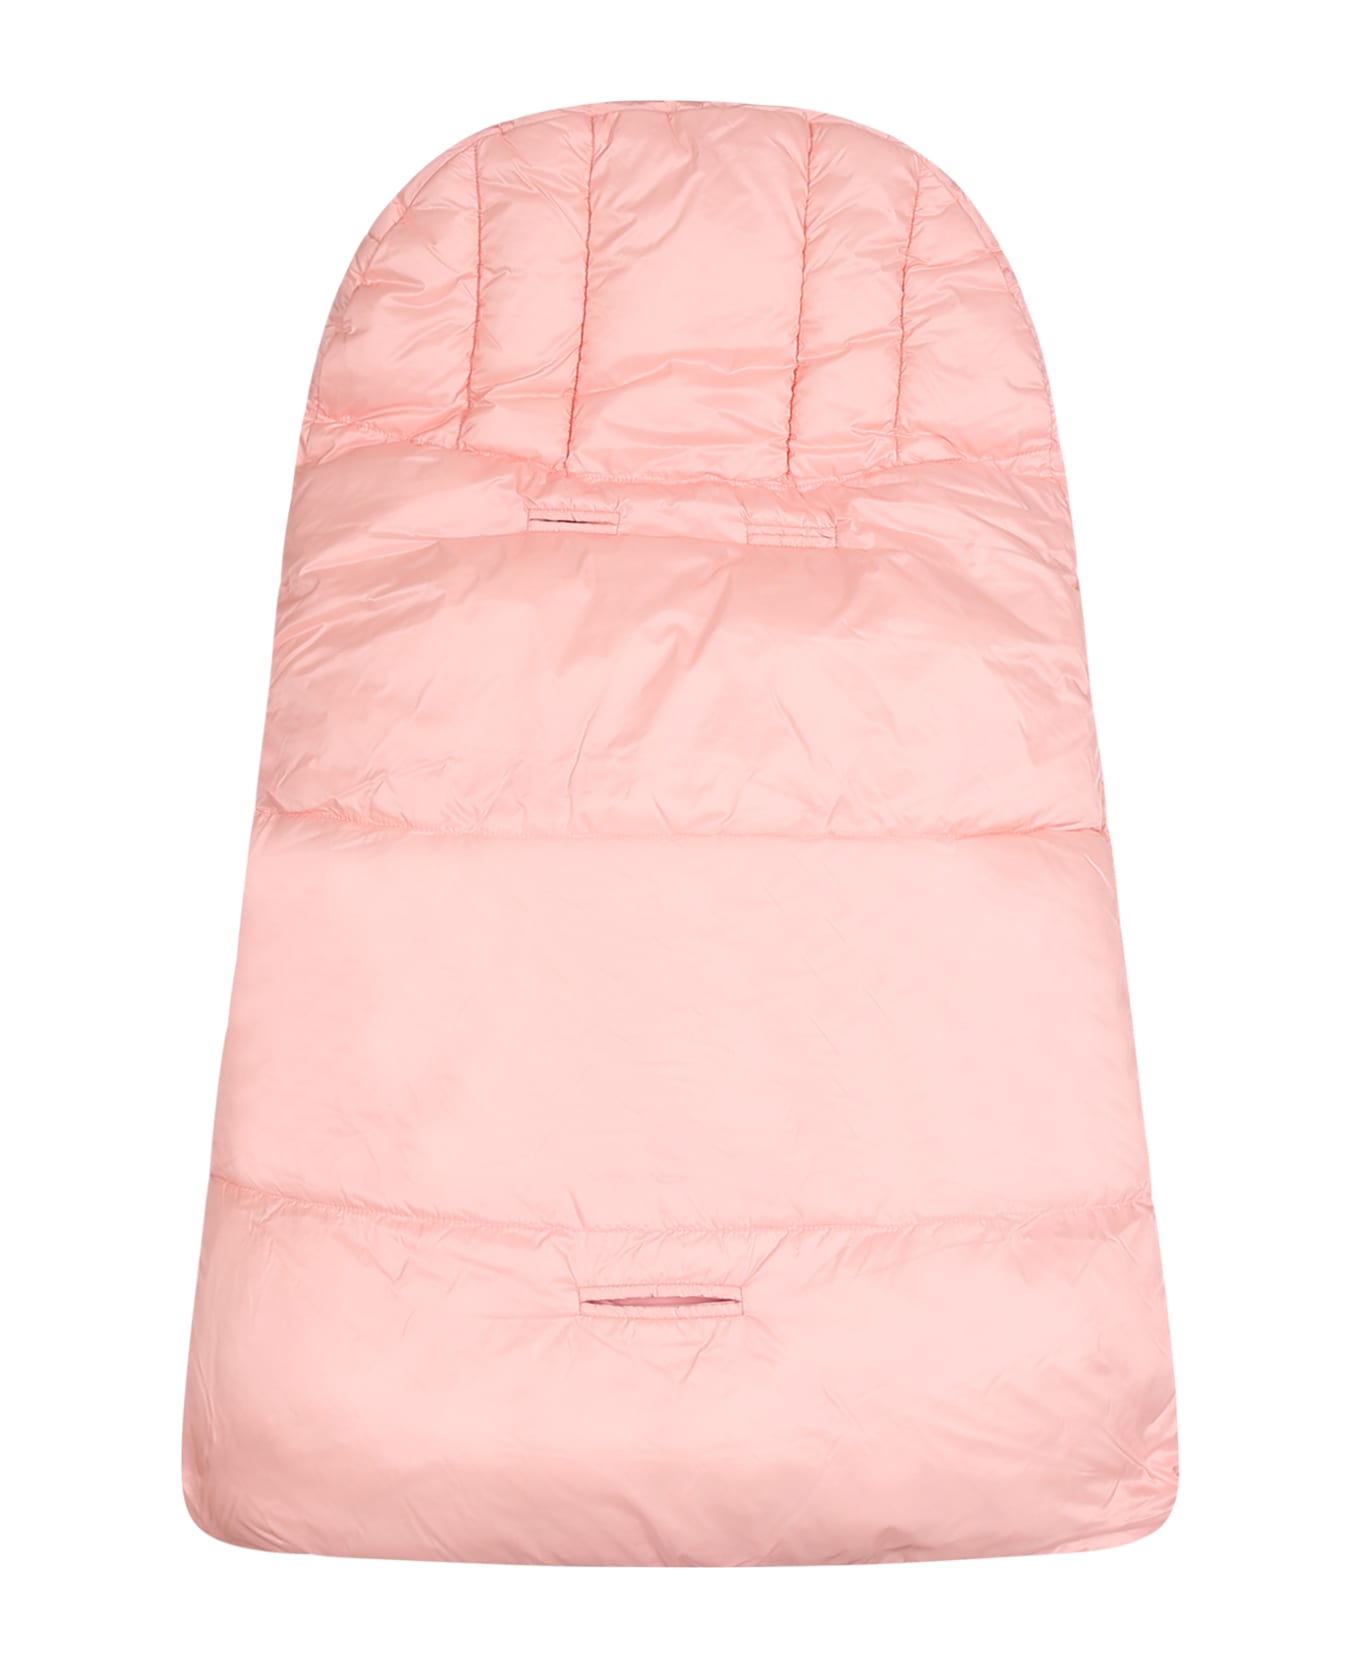 Moschino Pink Sleeping Bag For Baby Girl With Teddy Bear And Logo - Pink